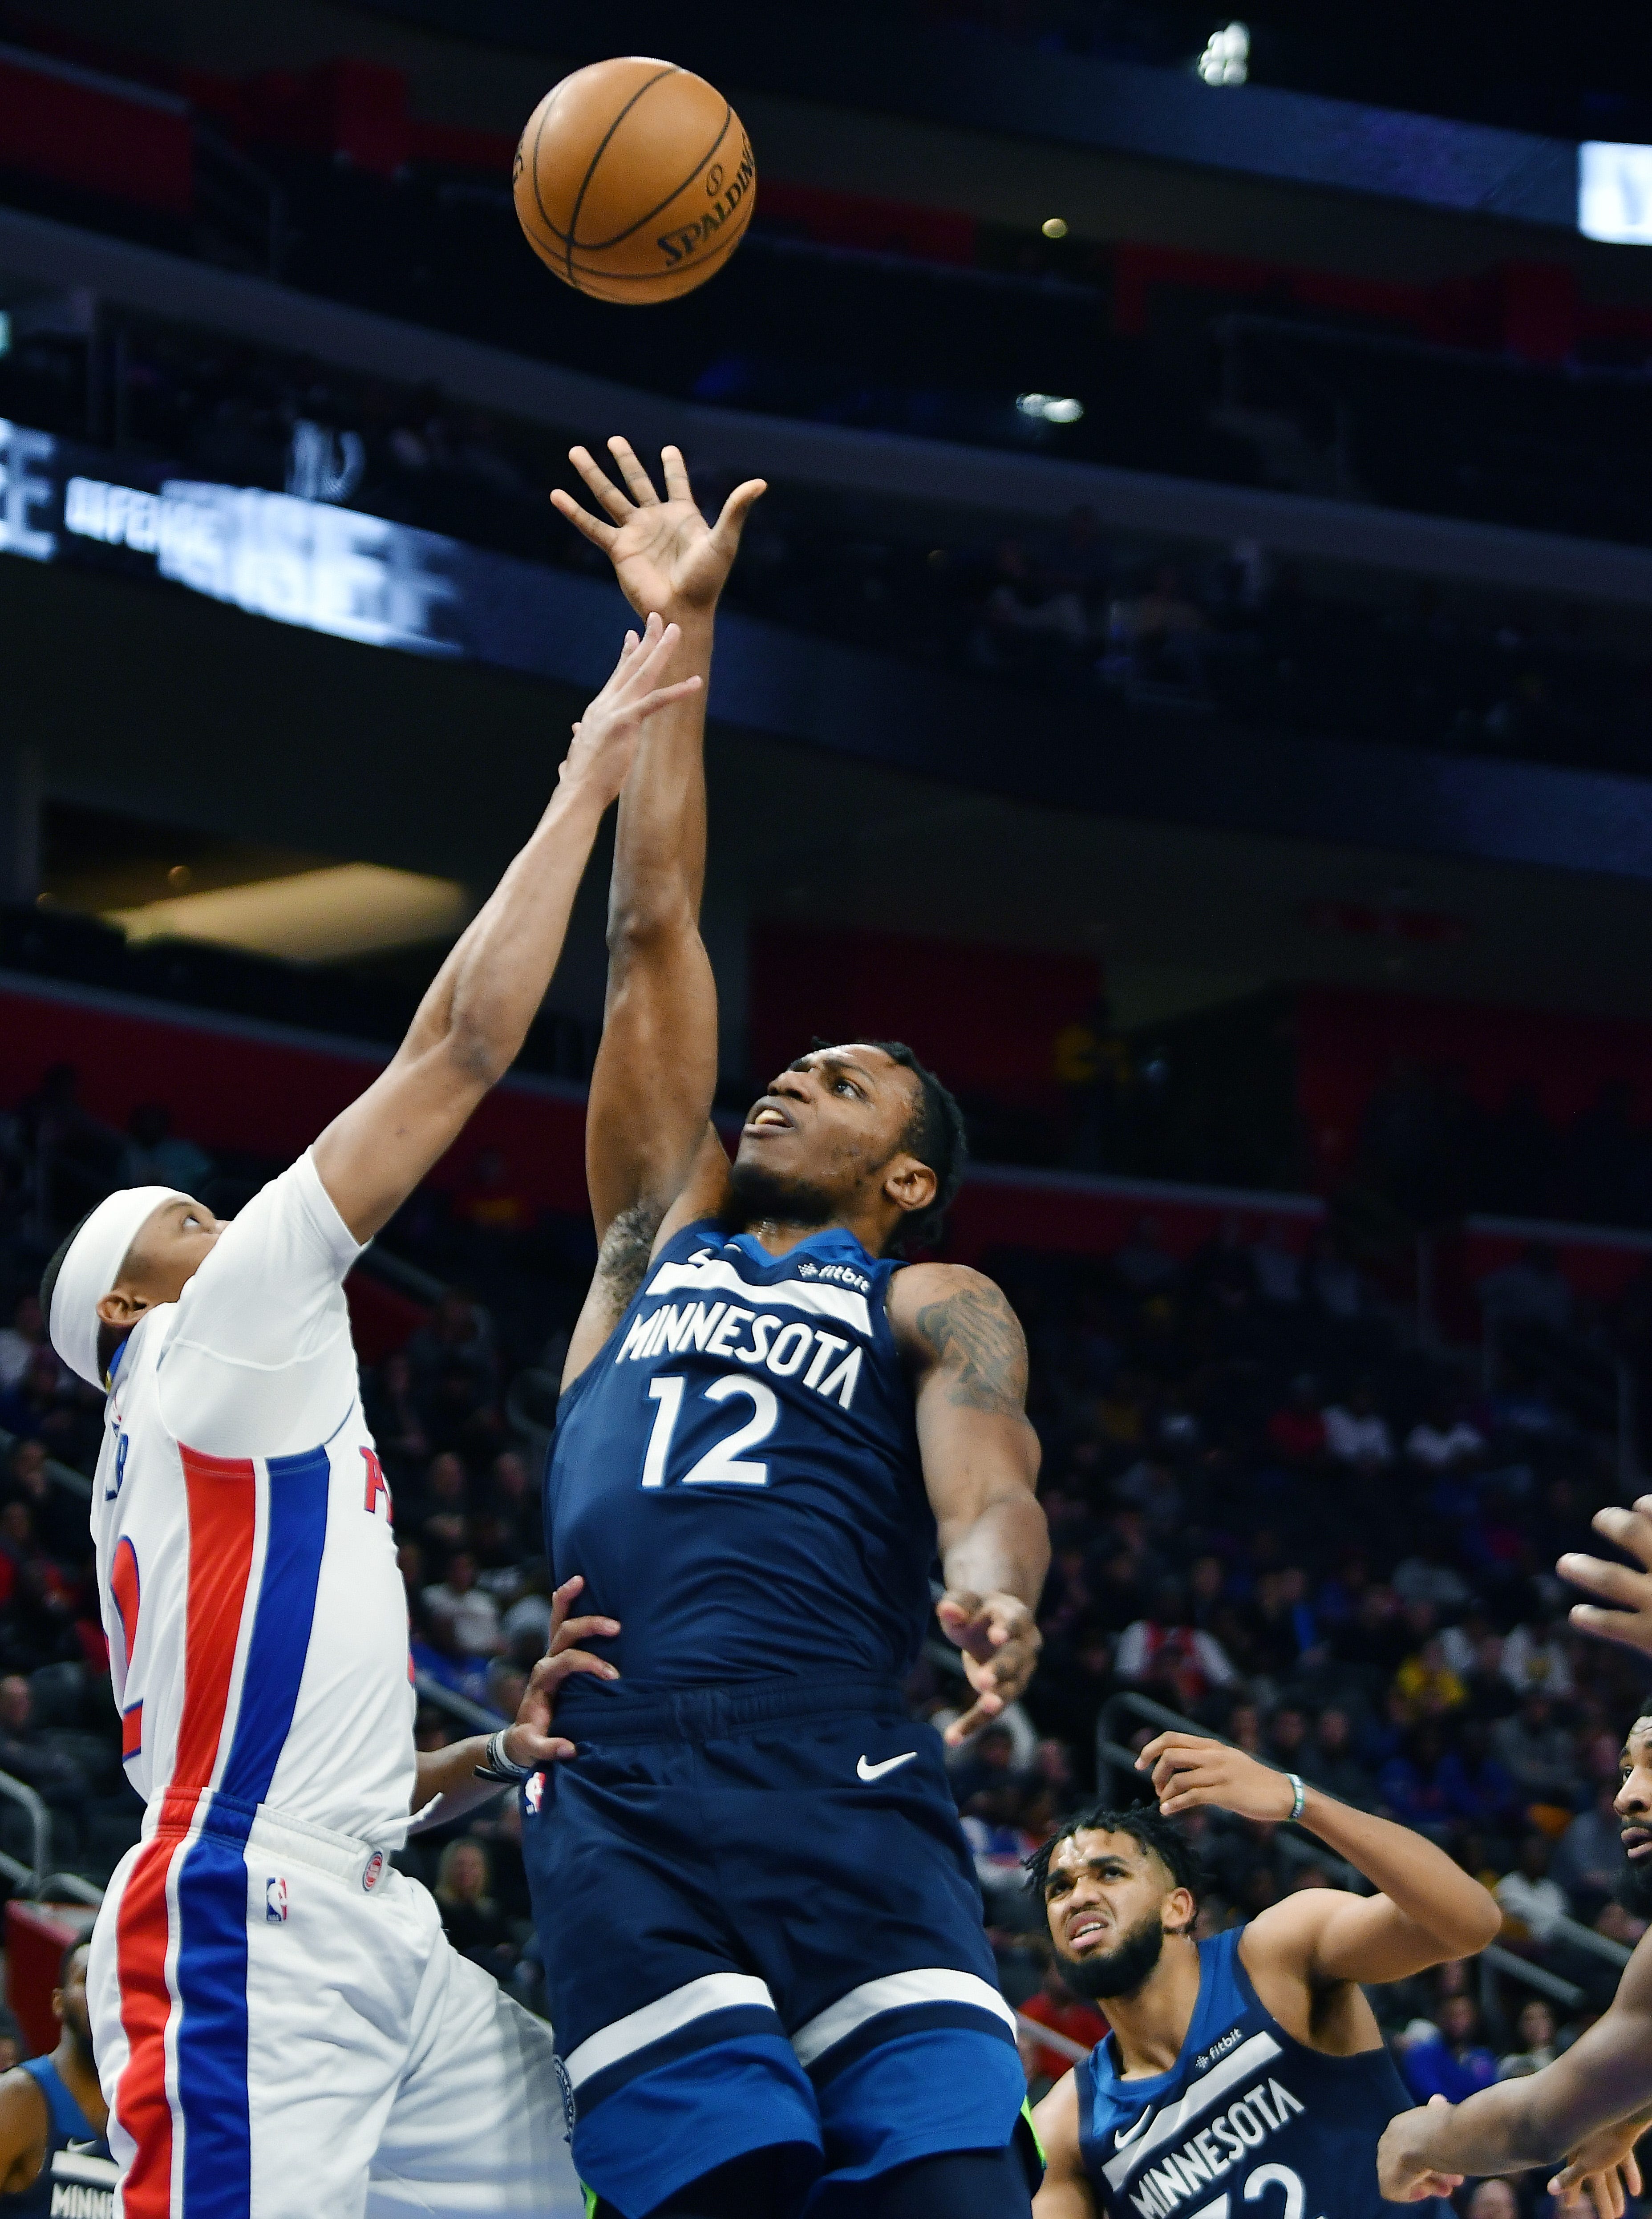 Timberwolves' Treveon Graham shoots over Pistons' Tim Frazier in the fourth quarter.